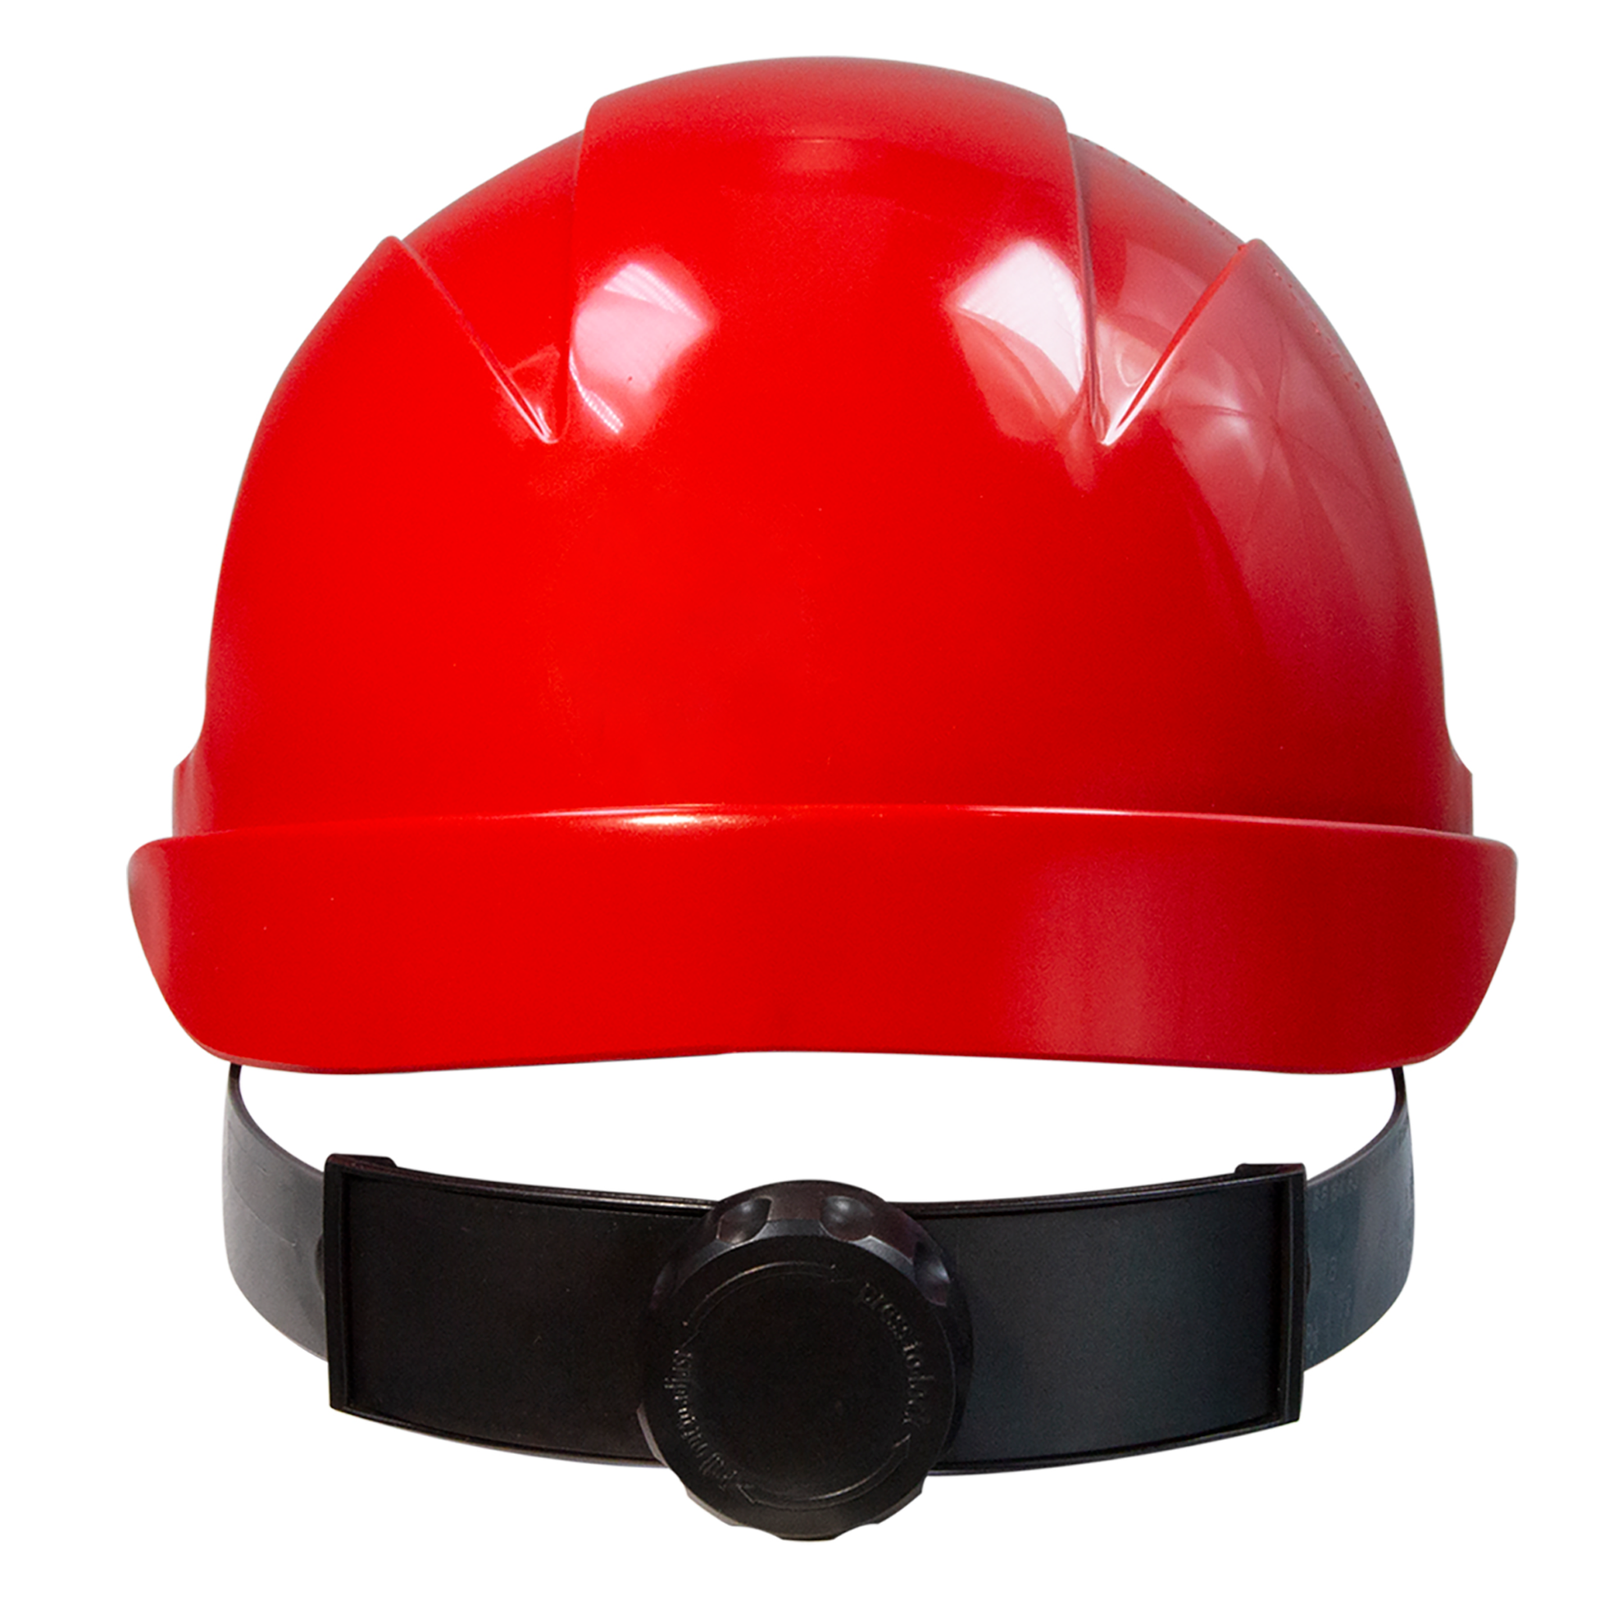 Red hard hat with size adjustable ratchet system and 4 point suspension